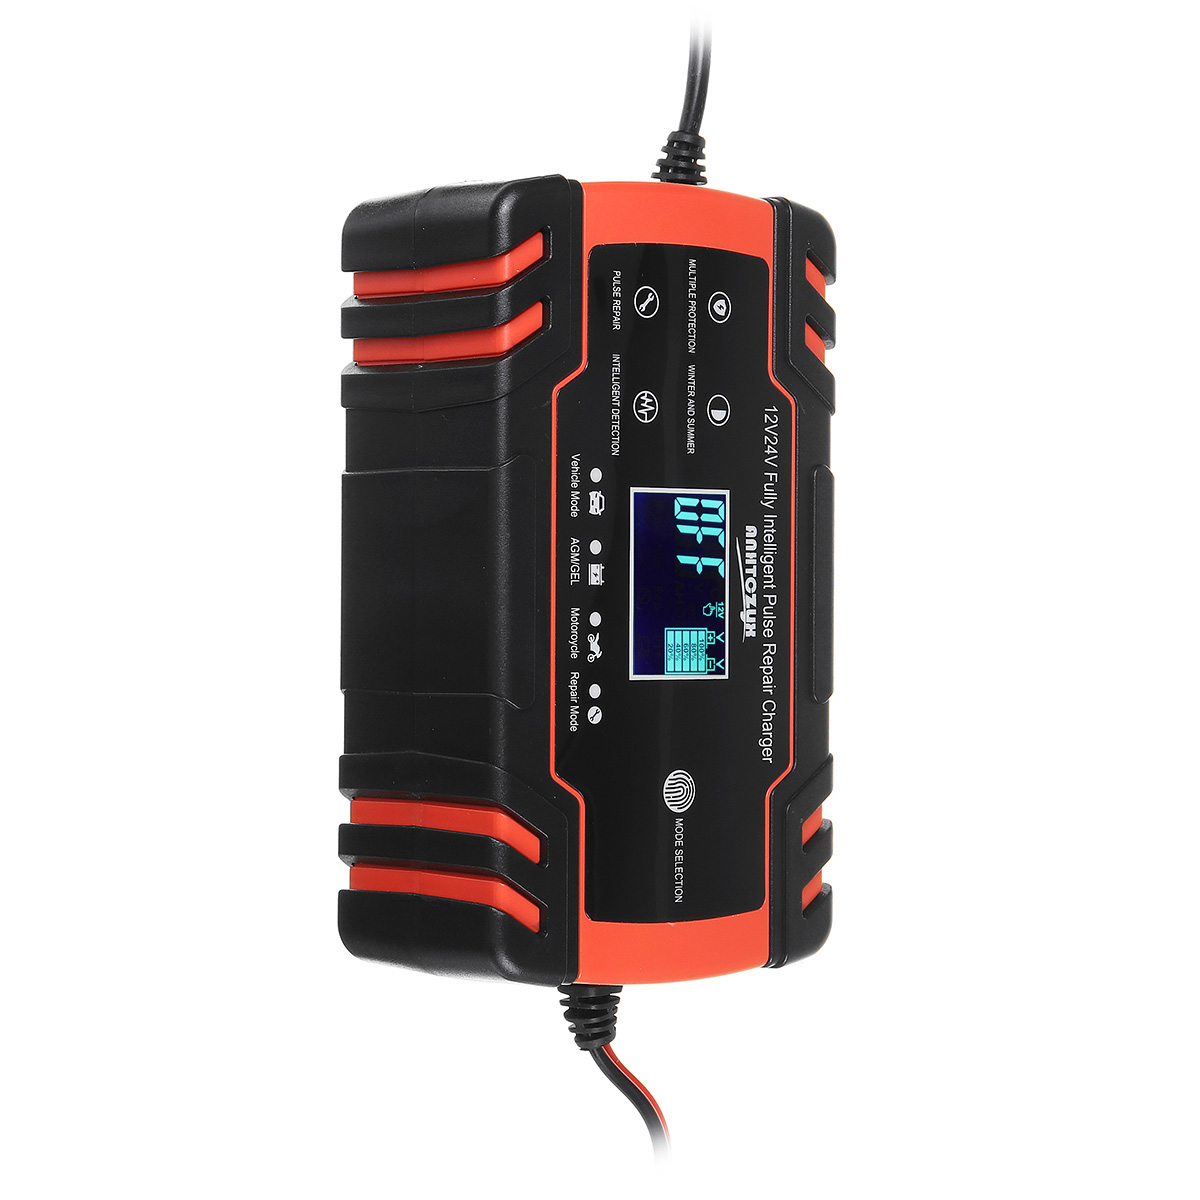 Enusic™ 12/24V 8A Red Touch Screen Pulse Repair LCD Battery Charger for Car Motorcycle Lead Acid Battery Agm Gel Wet